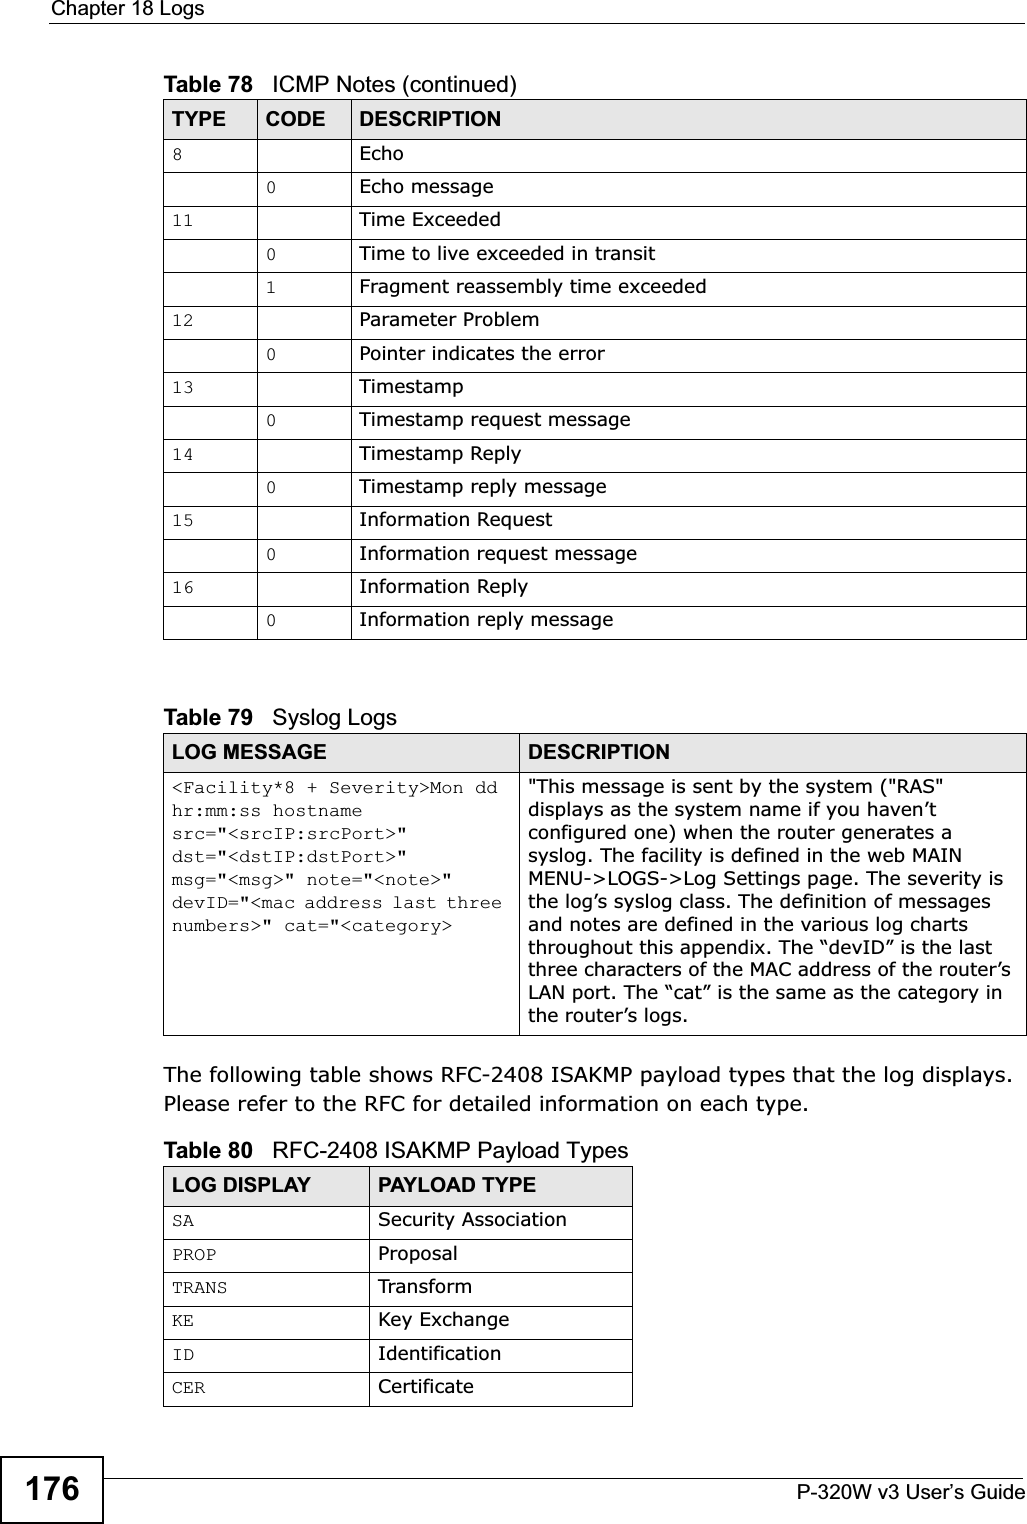 Chapter 18 LogsP-320W v3 User’s Guide176The following table shows RFC-2408 ISAKMP payload types that the log displays. Please refer to the RFC for detailed information on each type. 8Echo0Echo message11 Time Exceeded0Time to live exceeded in transit1Fragment reassembly time exceeded12 Parameter Problem0Pointer indicates the error13 Timestamp0Timestamp request message14 Timestamp Reply0Timestamp reply message15 Information Request0Information request message16 Information Reply0Information reply messageTable 79   Syslog LogsLOG MESSAGE DESCRIPTION&lt;Facility*8 + Severity&gt;Mon dd hr:mm:ss hostname src=&quot;&lt;srcIP:srcPort&gt;&quot; dst=&quot;&lt;dstIP:dstPort&gt;&quot; msg=&quot;&lt;msg&gt;&quot; note=&quot;&lt;note&gt;&quot; devID=&quot;&lt;mac address last three numbers&gt;&quot; cat=&quot;&lt;category&gt;&quot;This message is sent by the system (&quot;RAS&quot; displays as the system name if you haven’t configured one) when the router generates a syslog. The facility is defined in the web MAIN MENU-&gt;LOGS-&gt;Log Settings page. The severity is the log’s syslog class. The definition of messages and notes are defined in the various log charts throughout this appendix. The “devID” is the last three characters of the MAC address of the router’s LAN port. The “cat” is the same as the category in the router’s logs.Table 80   RFC-2408 ISAKMP Payload TypesLOG DISPLAY PAYLOAD TYPESA Security AssociationPROP ProposalTRANS TransformKE Key ExchangeID IdentificationCER CertificateTable 78   ICMP Notes (continued)TYPE CODE DESCRIPTION